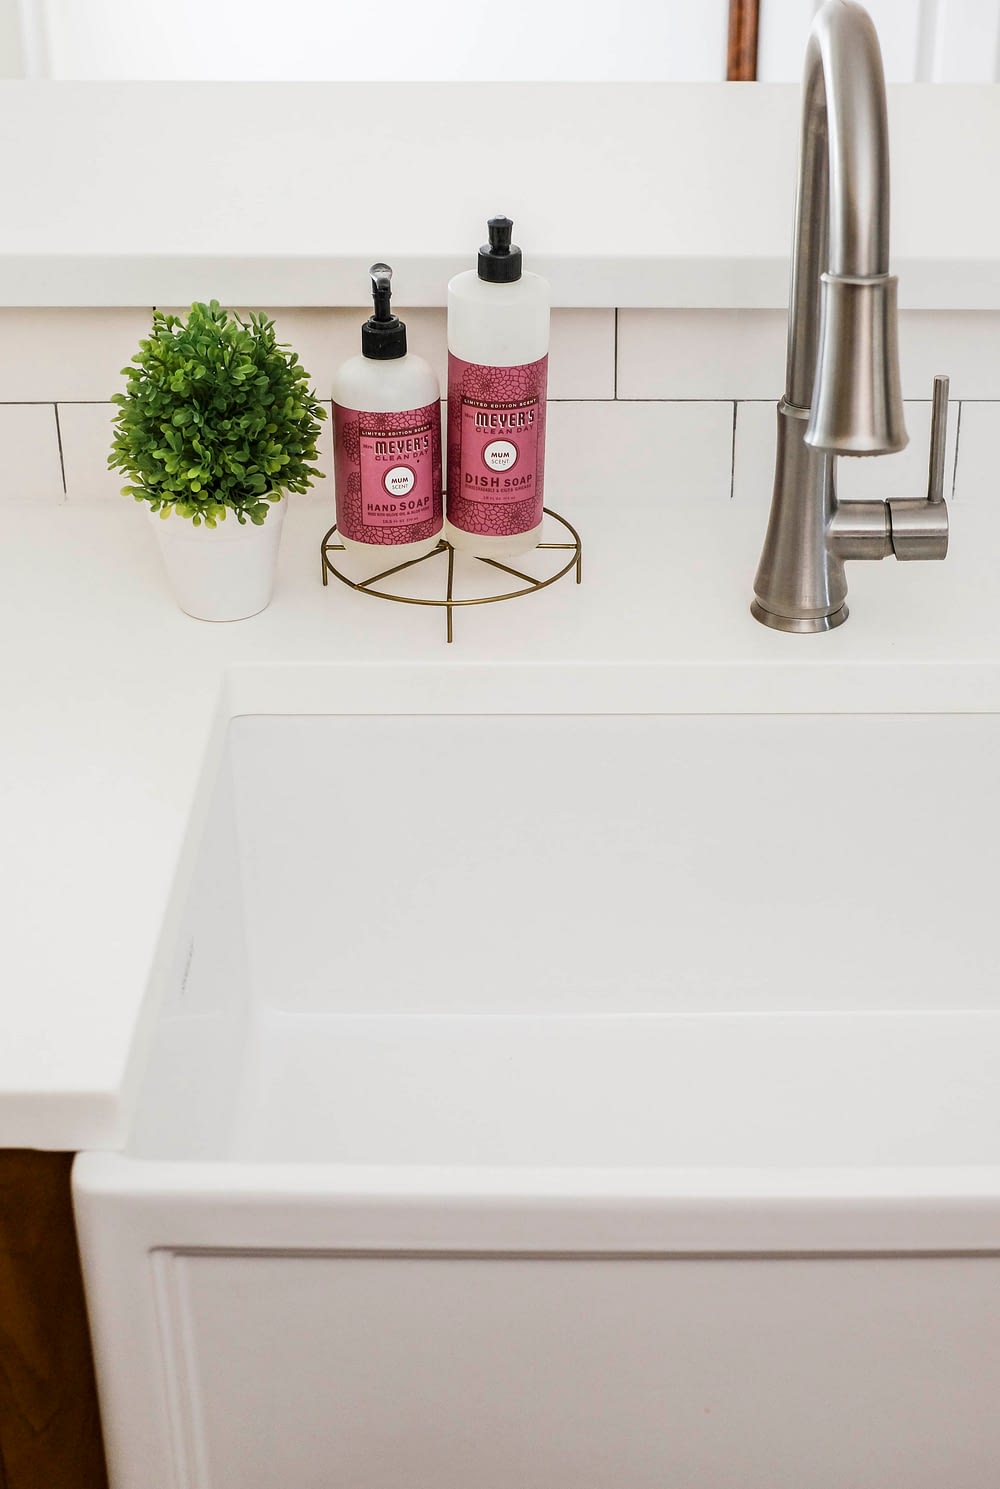 White fireclay farmhouse sink with a closeup on dish soap used to keep it clean